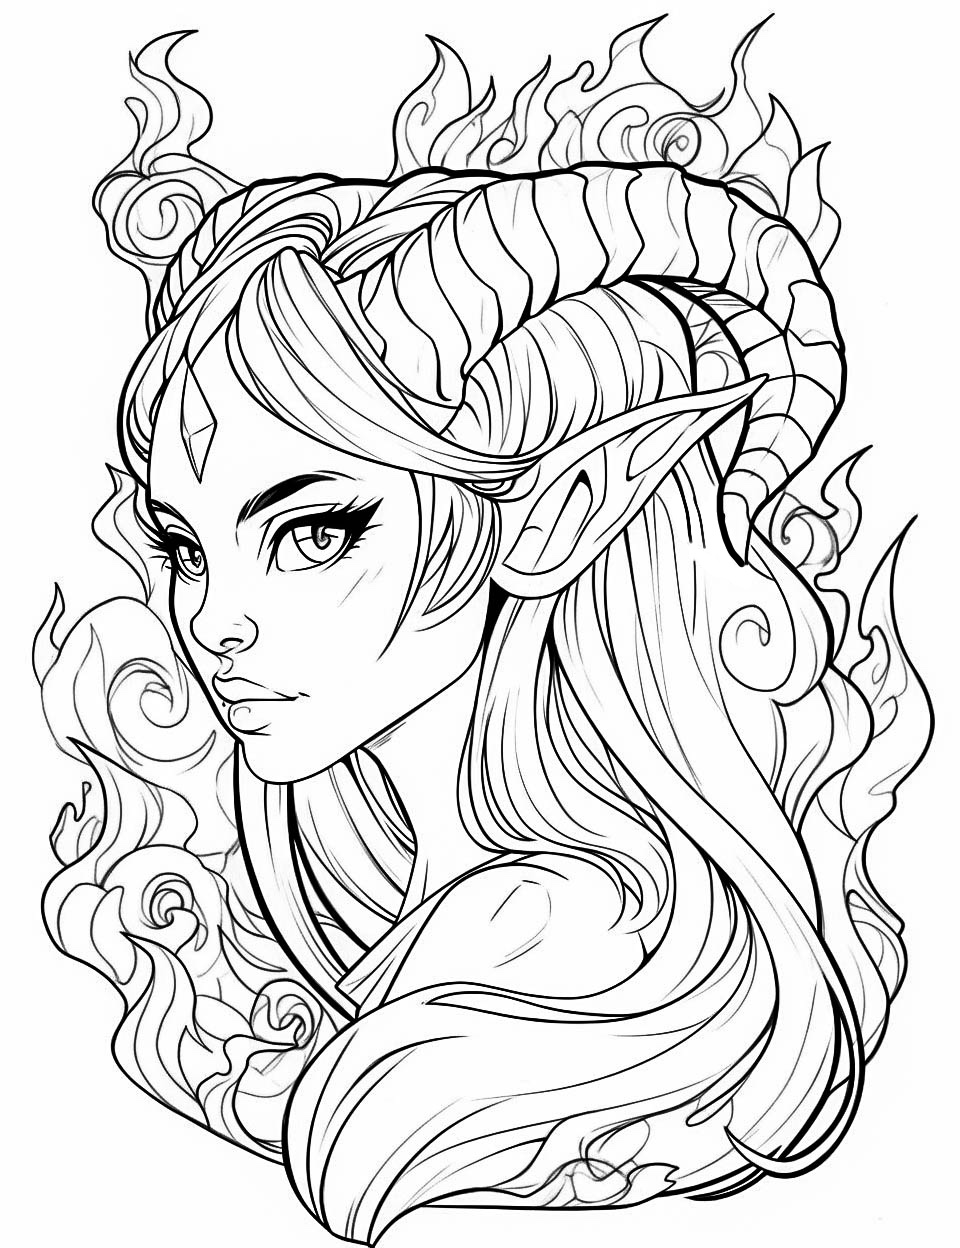 36 Stunning Elf Coloring Pages For Kids and Adults - Our Mindful Life